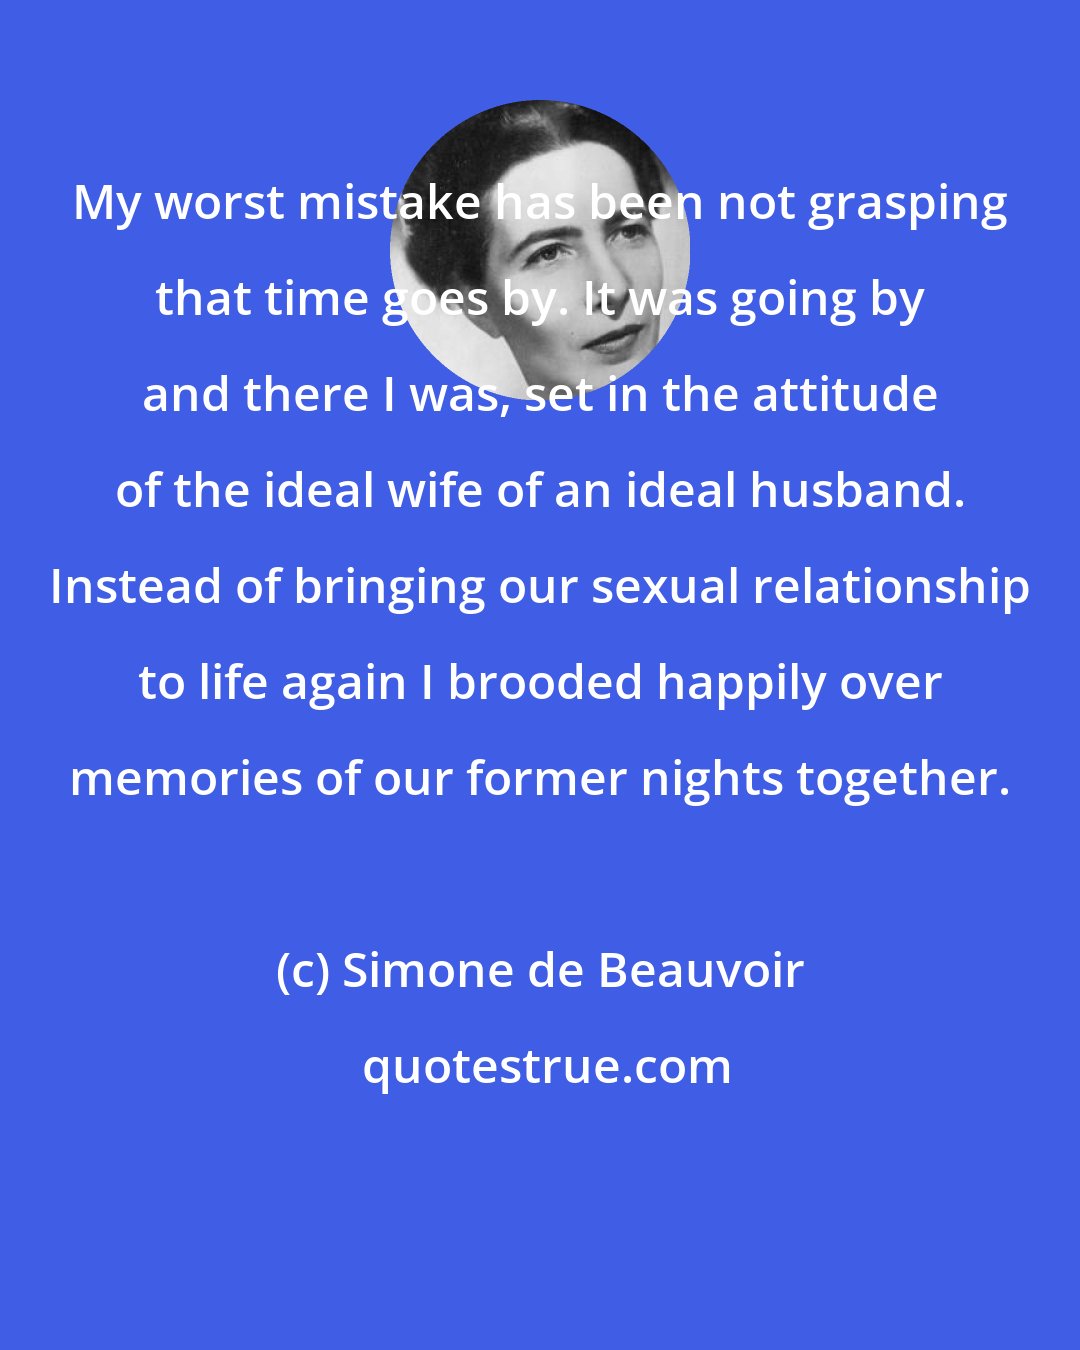 Simone de Beauvoir: My worst mistake has been not grasping that time goes by. It was going by and there I was, set in the attitude of the ideal wife of an ideal husband. Instead of bringing our sexual relationship to life again I brooded happily over memories of our former nights together.